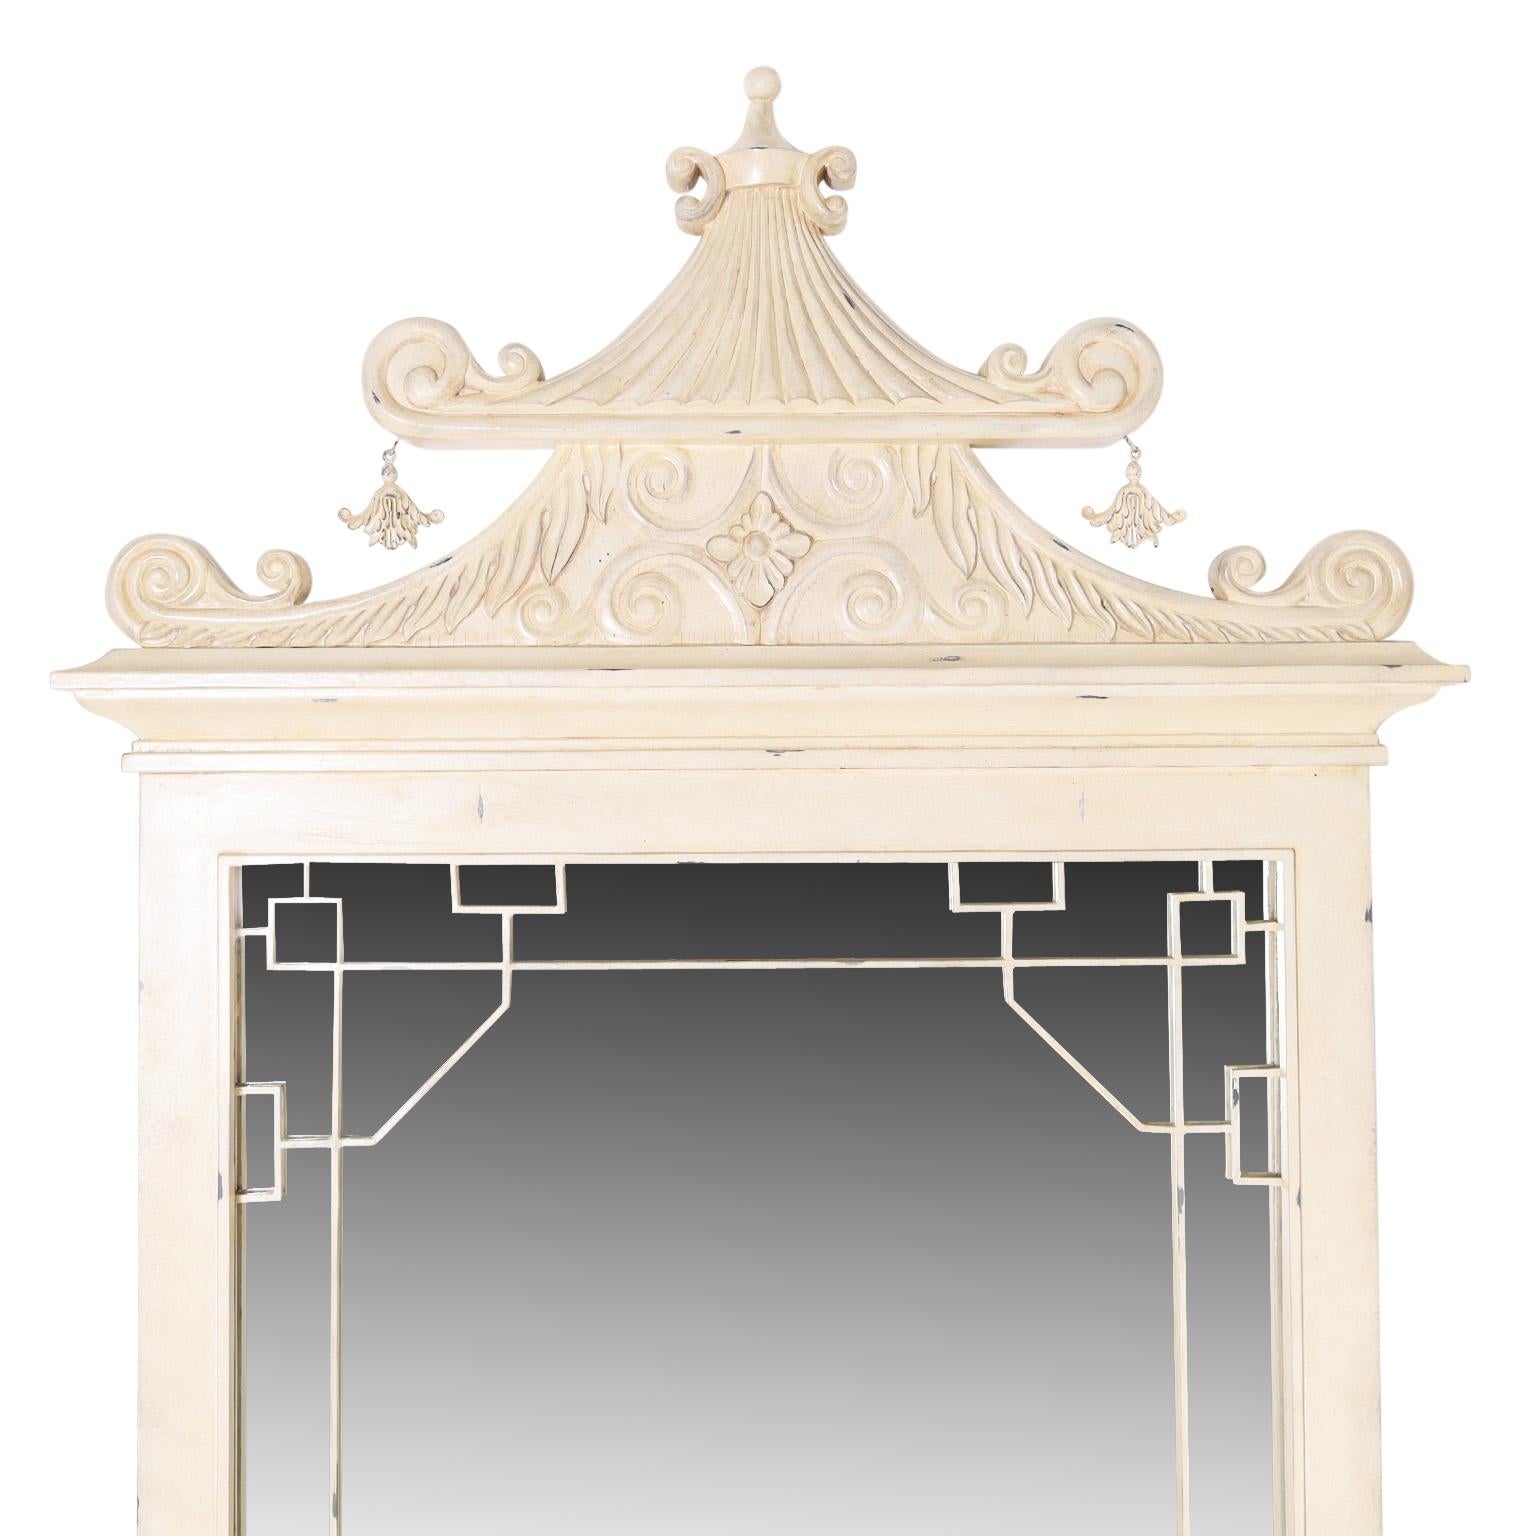 Giant pagoda form floor or wall mirror crafted in metal having a cream lacquer finish with contrived aging.